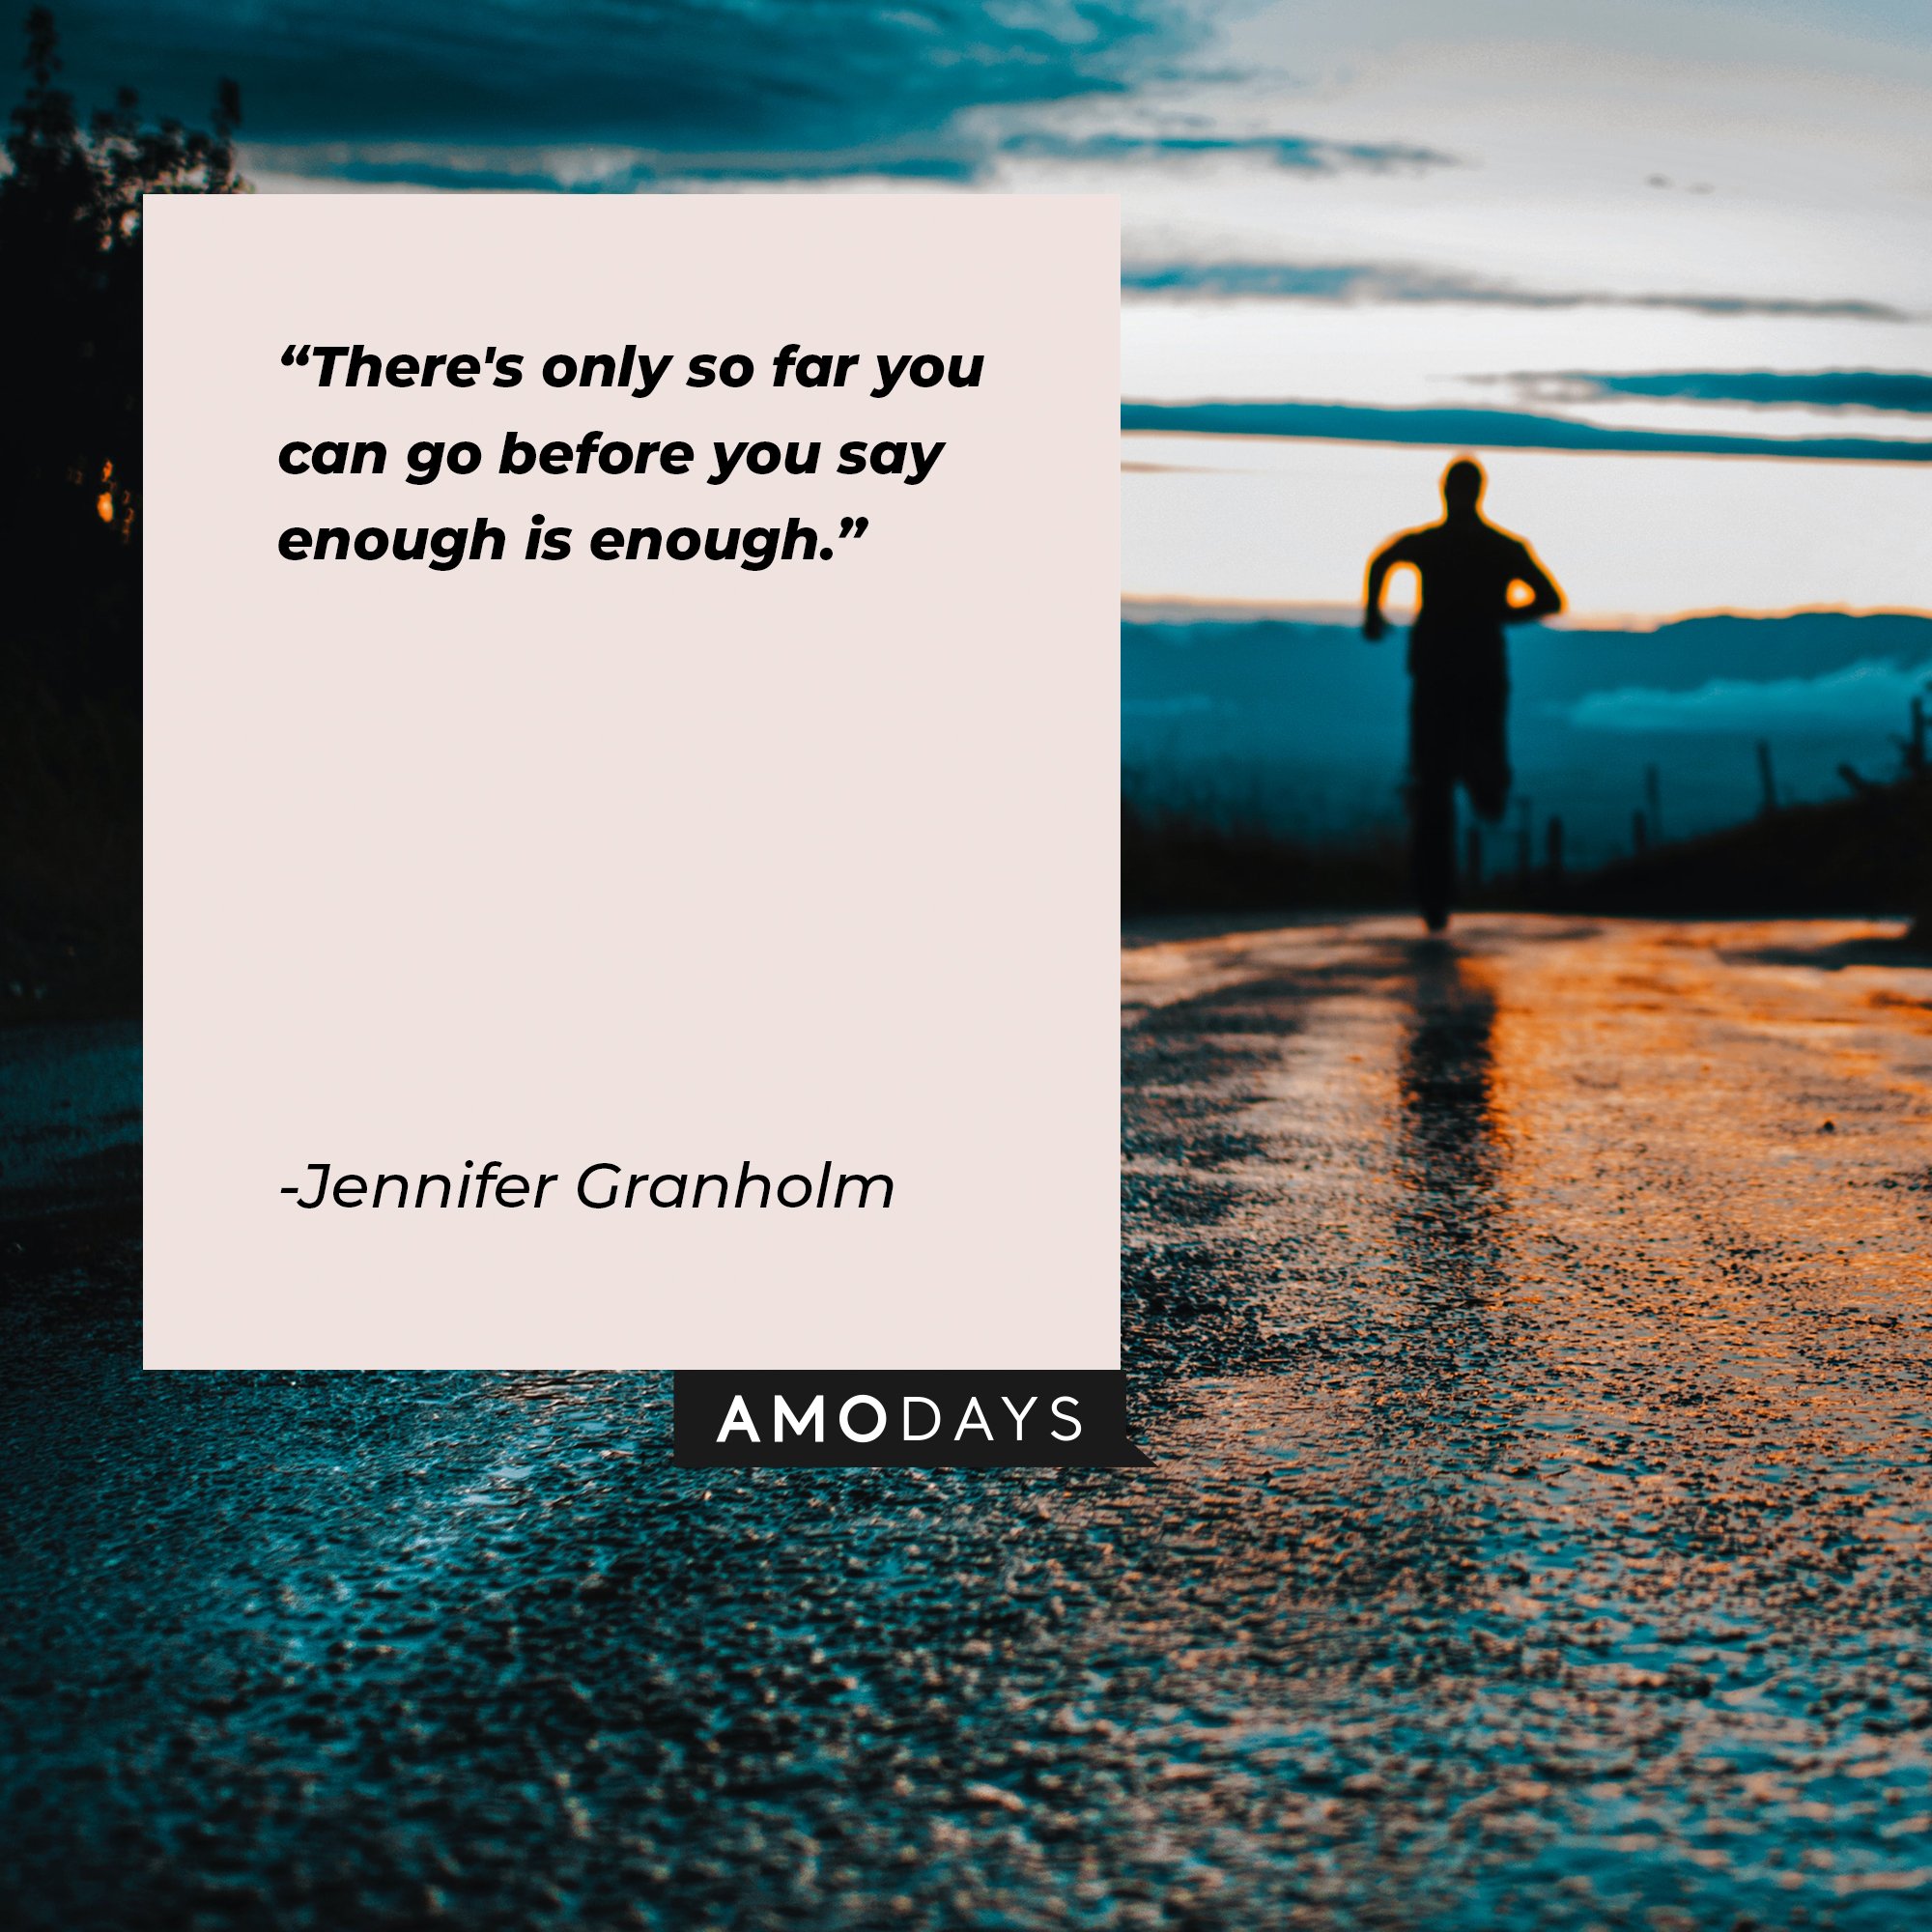 Jennifer Granholm’s quote: “There's only so far you can go before you say enough is enough.” | Image: AmoDays 